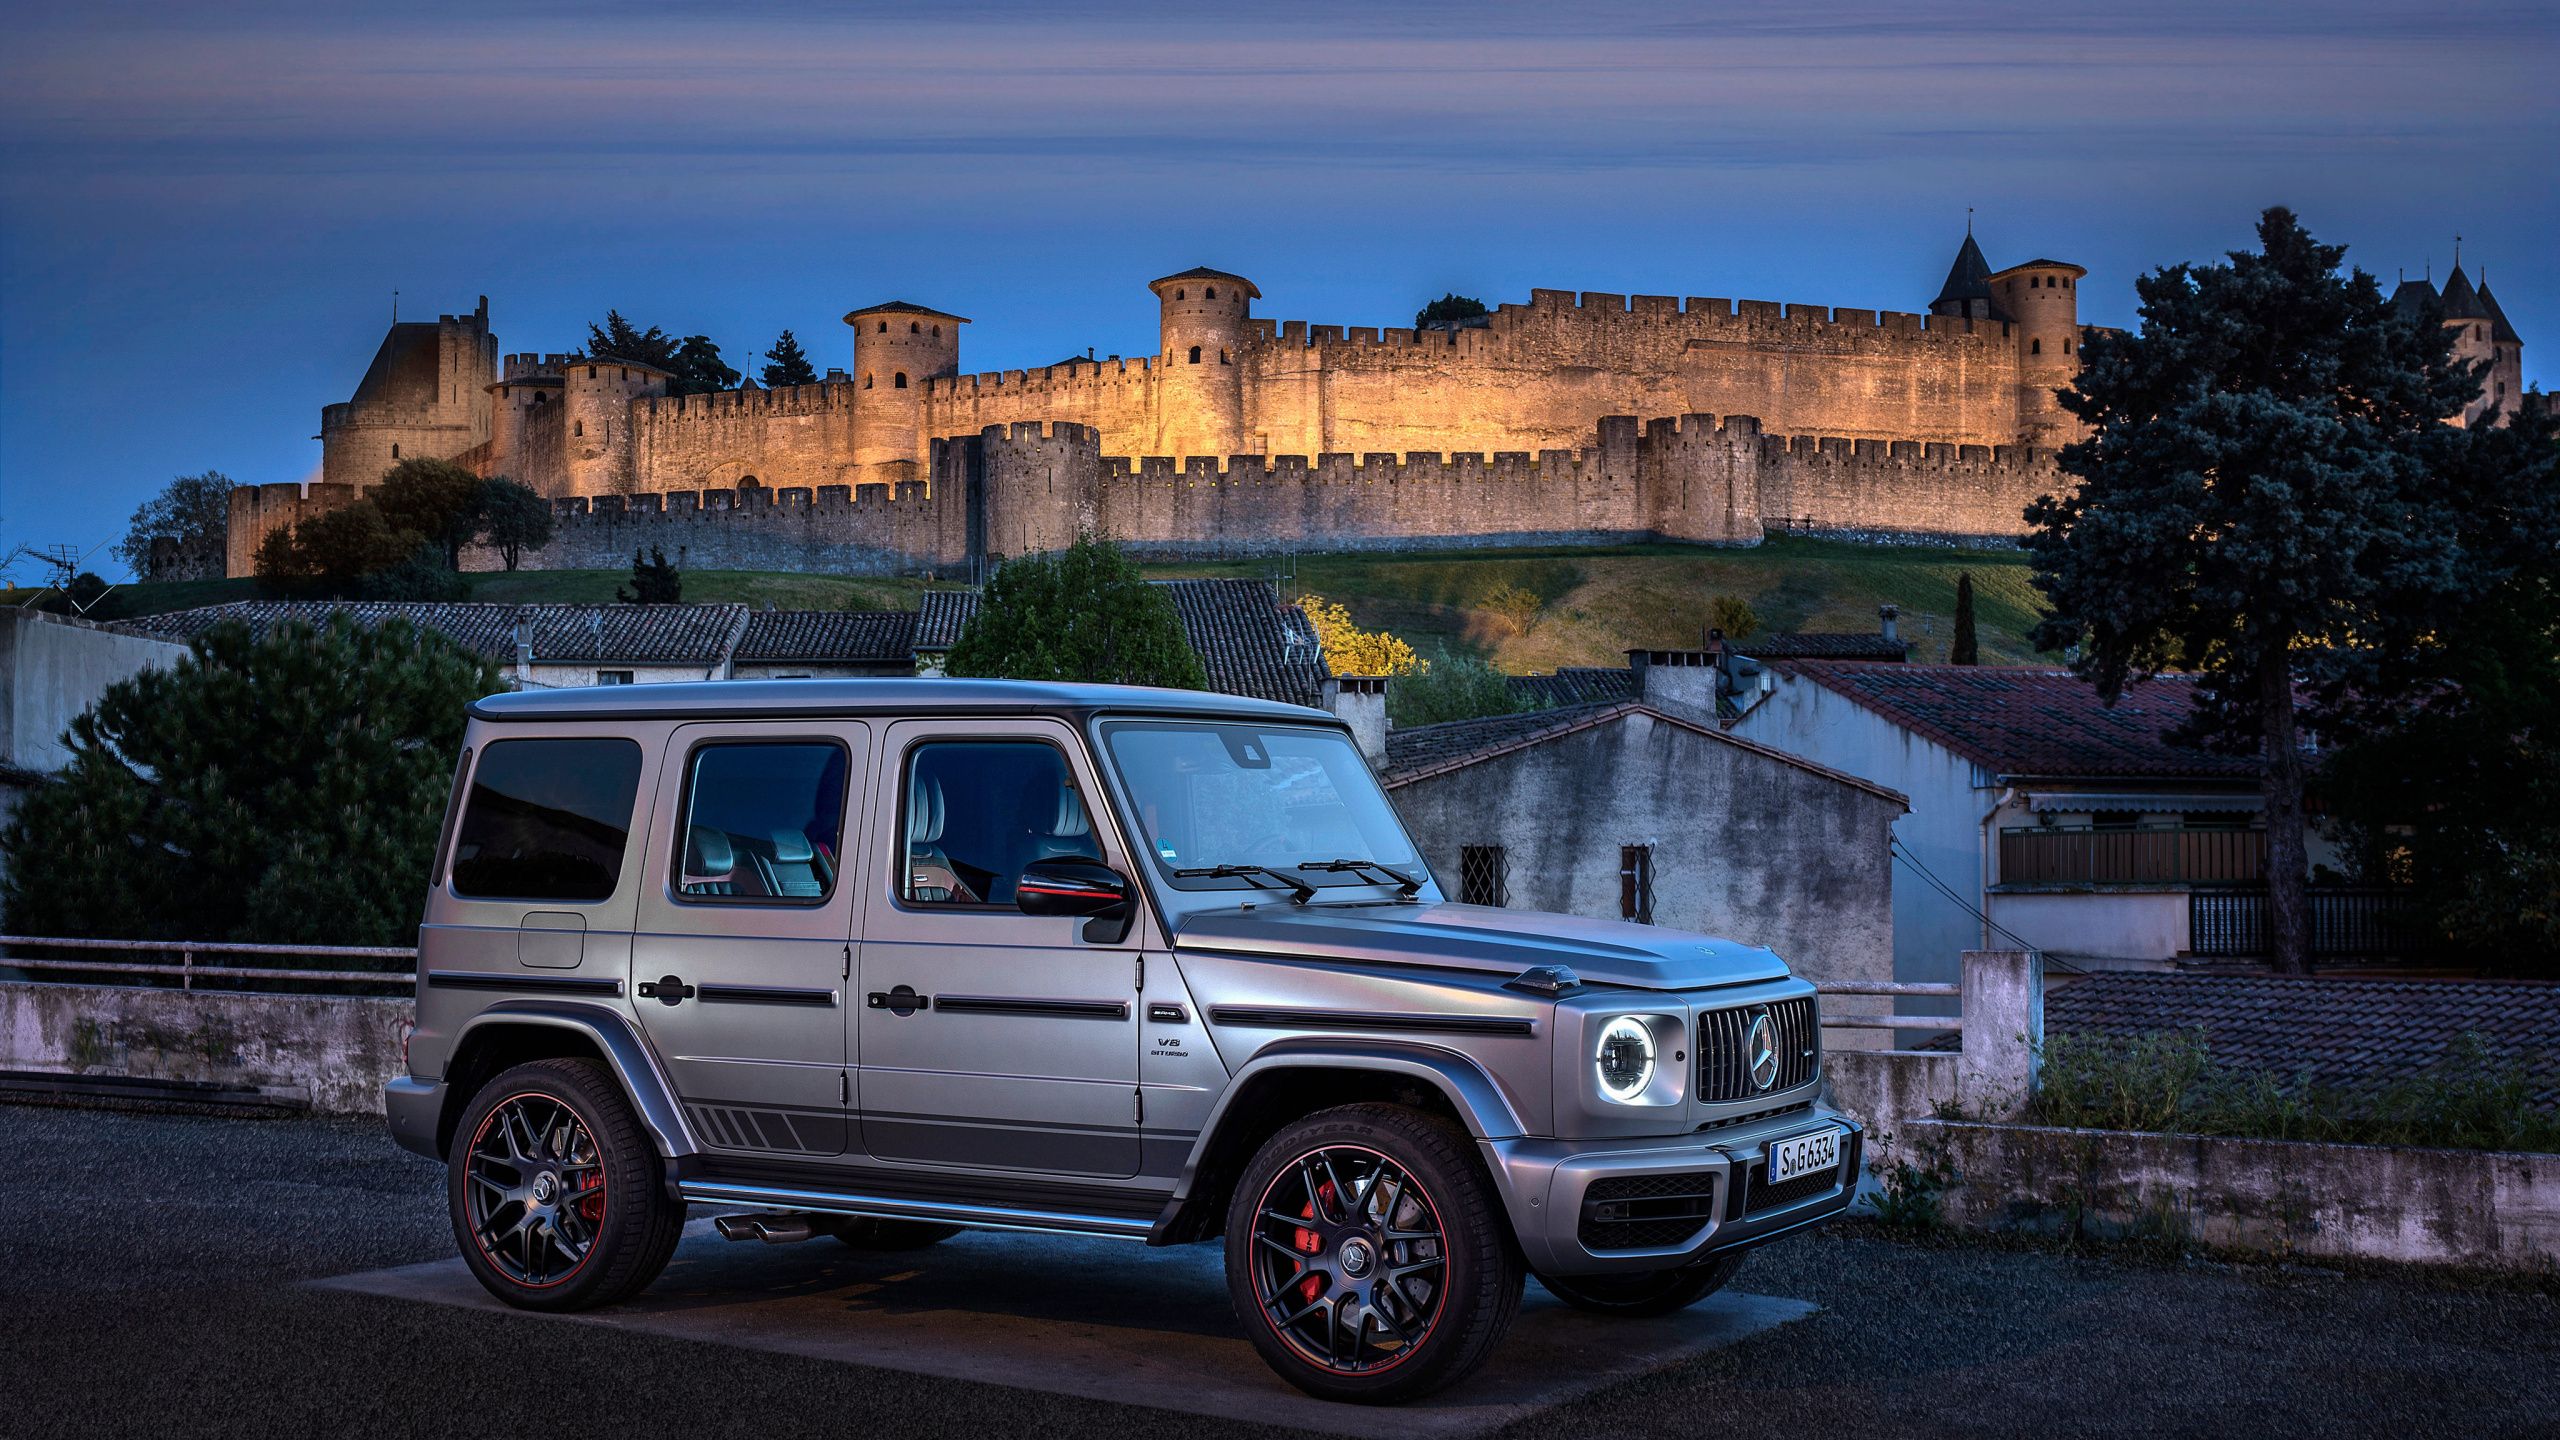 G63 Amg Wallpaper 4k Image Collection